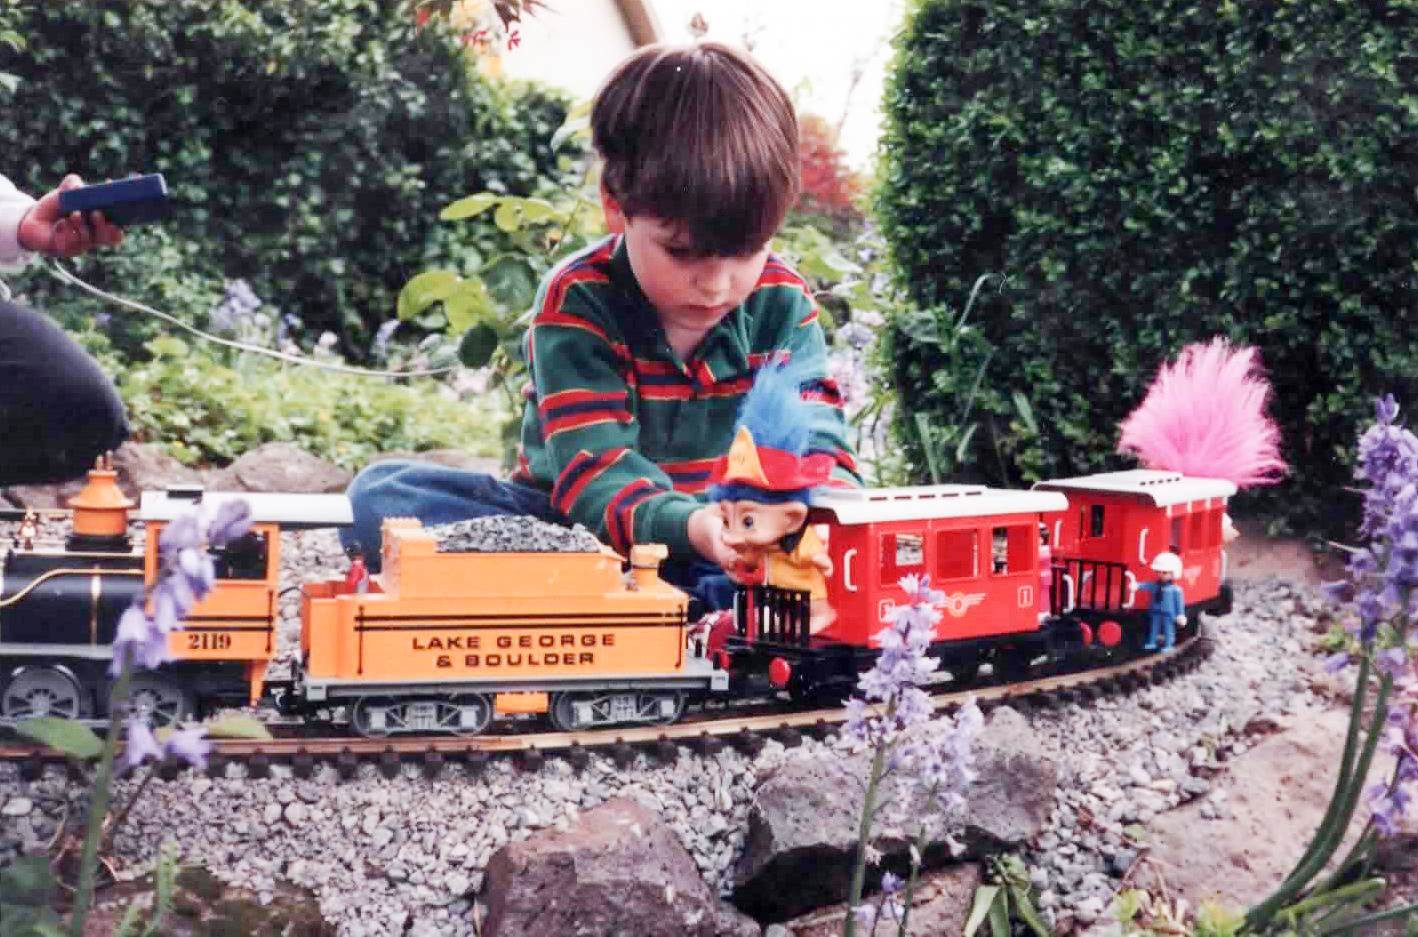 Tristan Rickett, as a child, plays with a model train and Troll dolls outside.